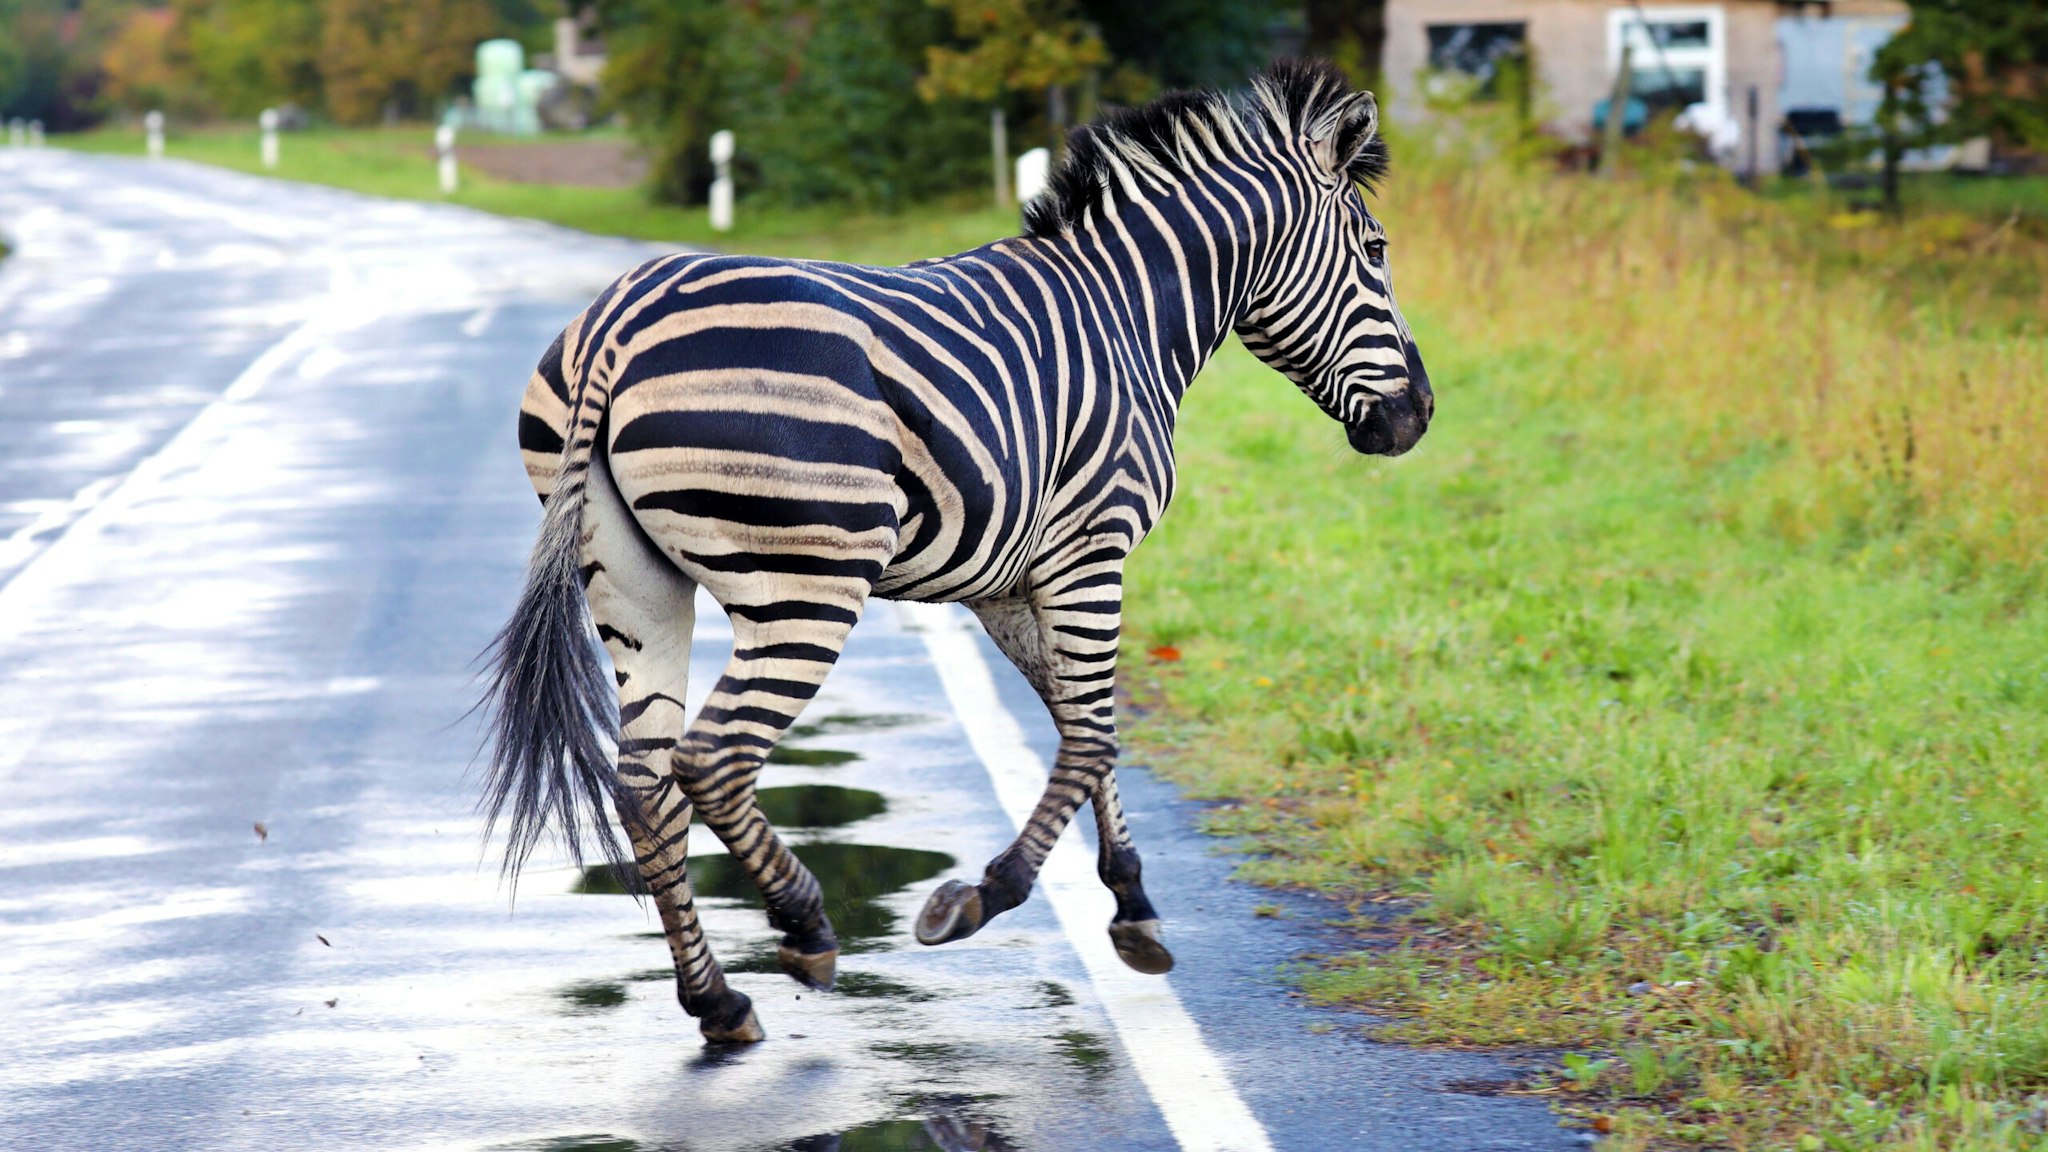 A zebra runs across a road on October 2, 2019 in the village of Thelkow, north-eastern Germany, after the animal had broken out of a circus with a fellow animal nearby, and had caused an accident on the A20 motorway in the area. - The other zebra had already been captured.